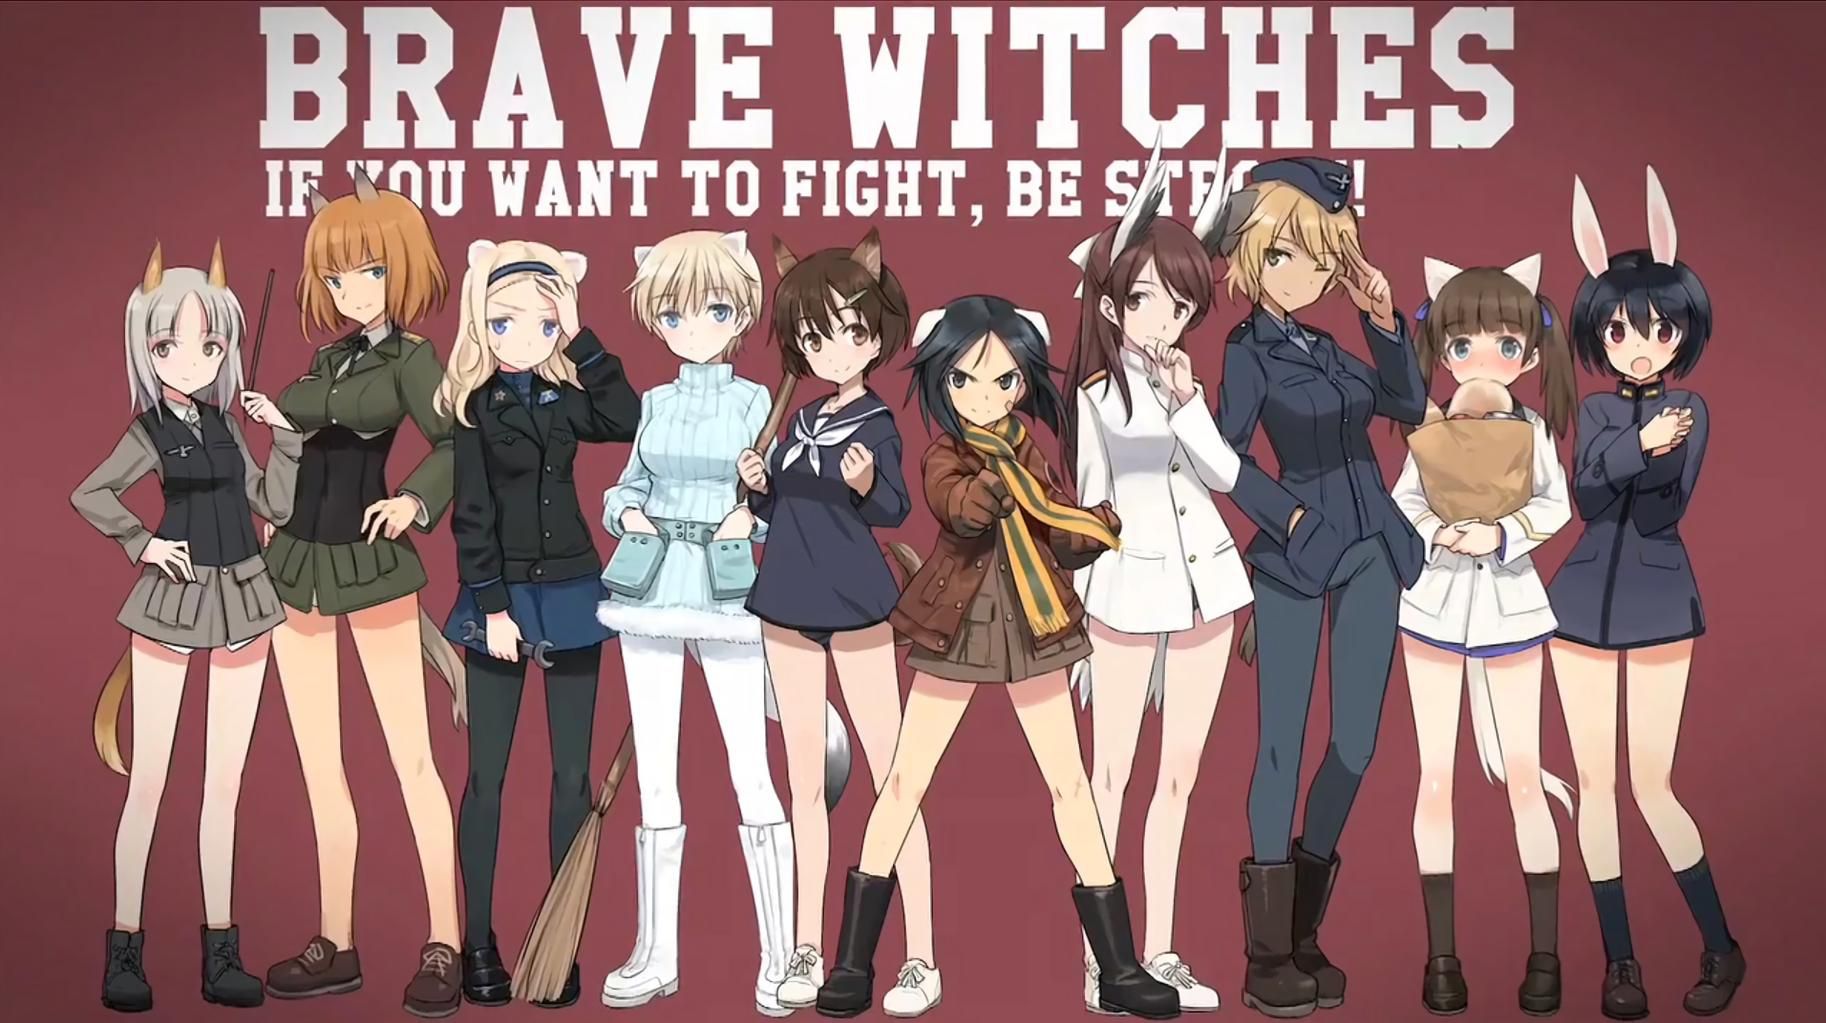 [Breaking] [strike Witches] new anime characters, all cute wwwwwww 13